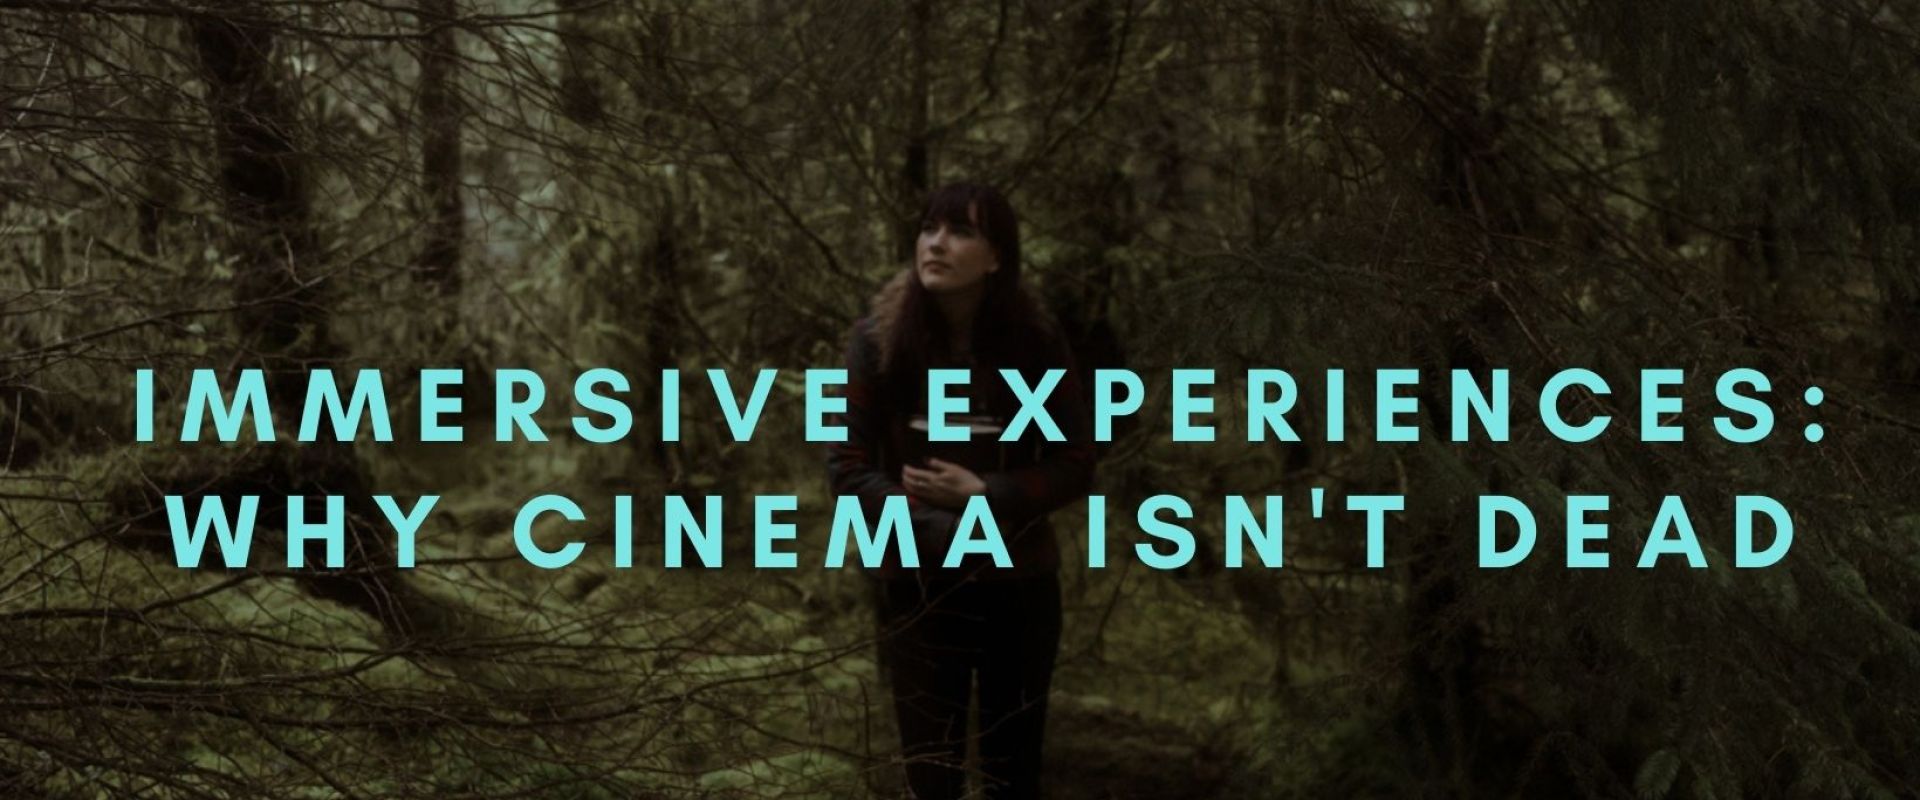 Immersive experiences: why cinema isn't dead